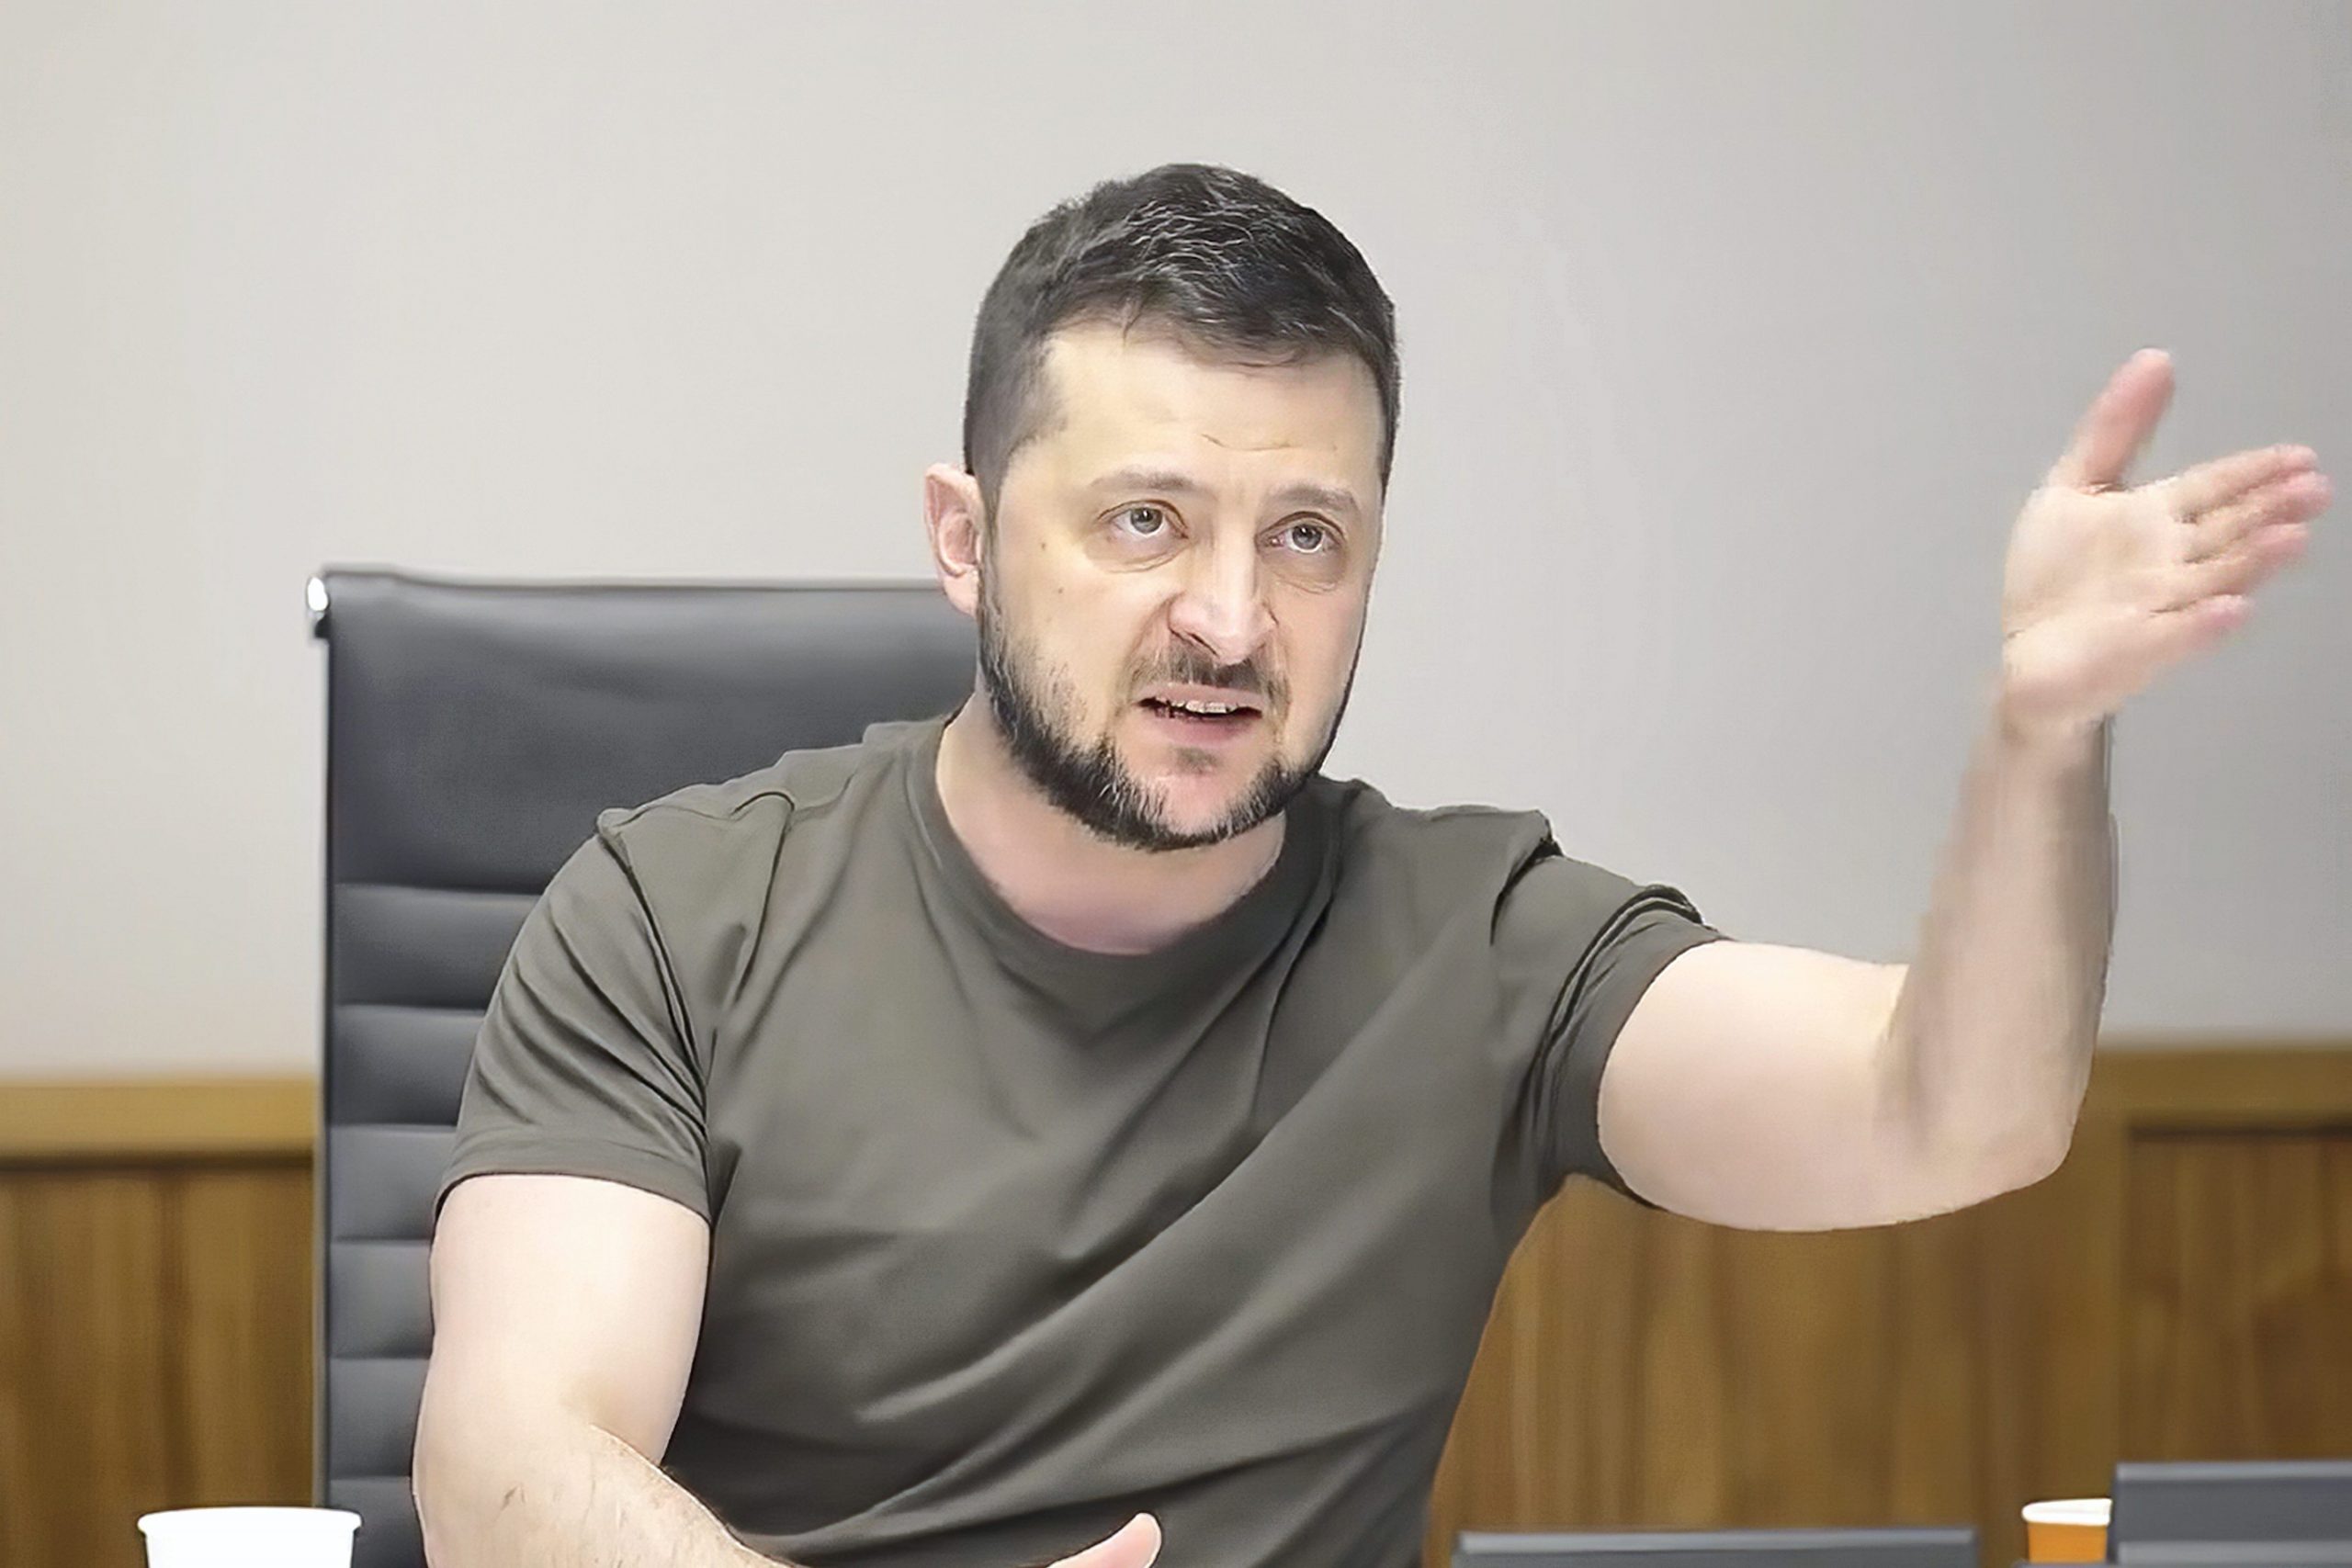 Explained: What does Zelensky mean by Ukraine’s neutrality?